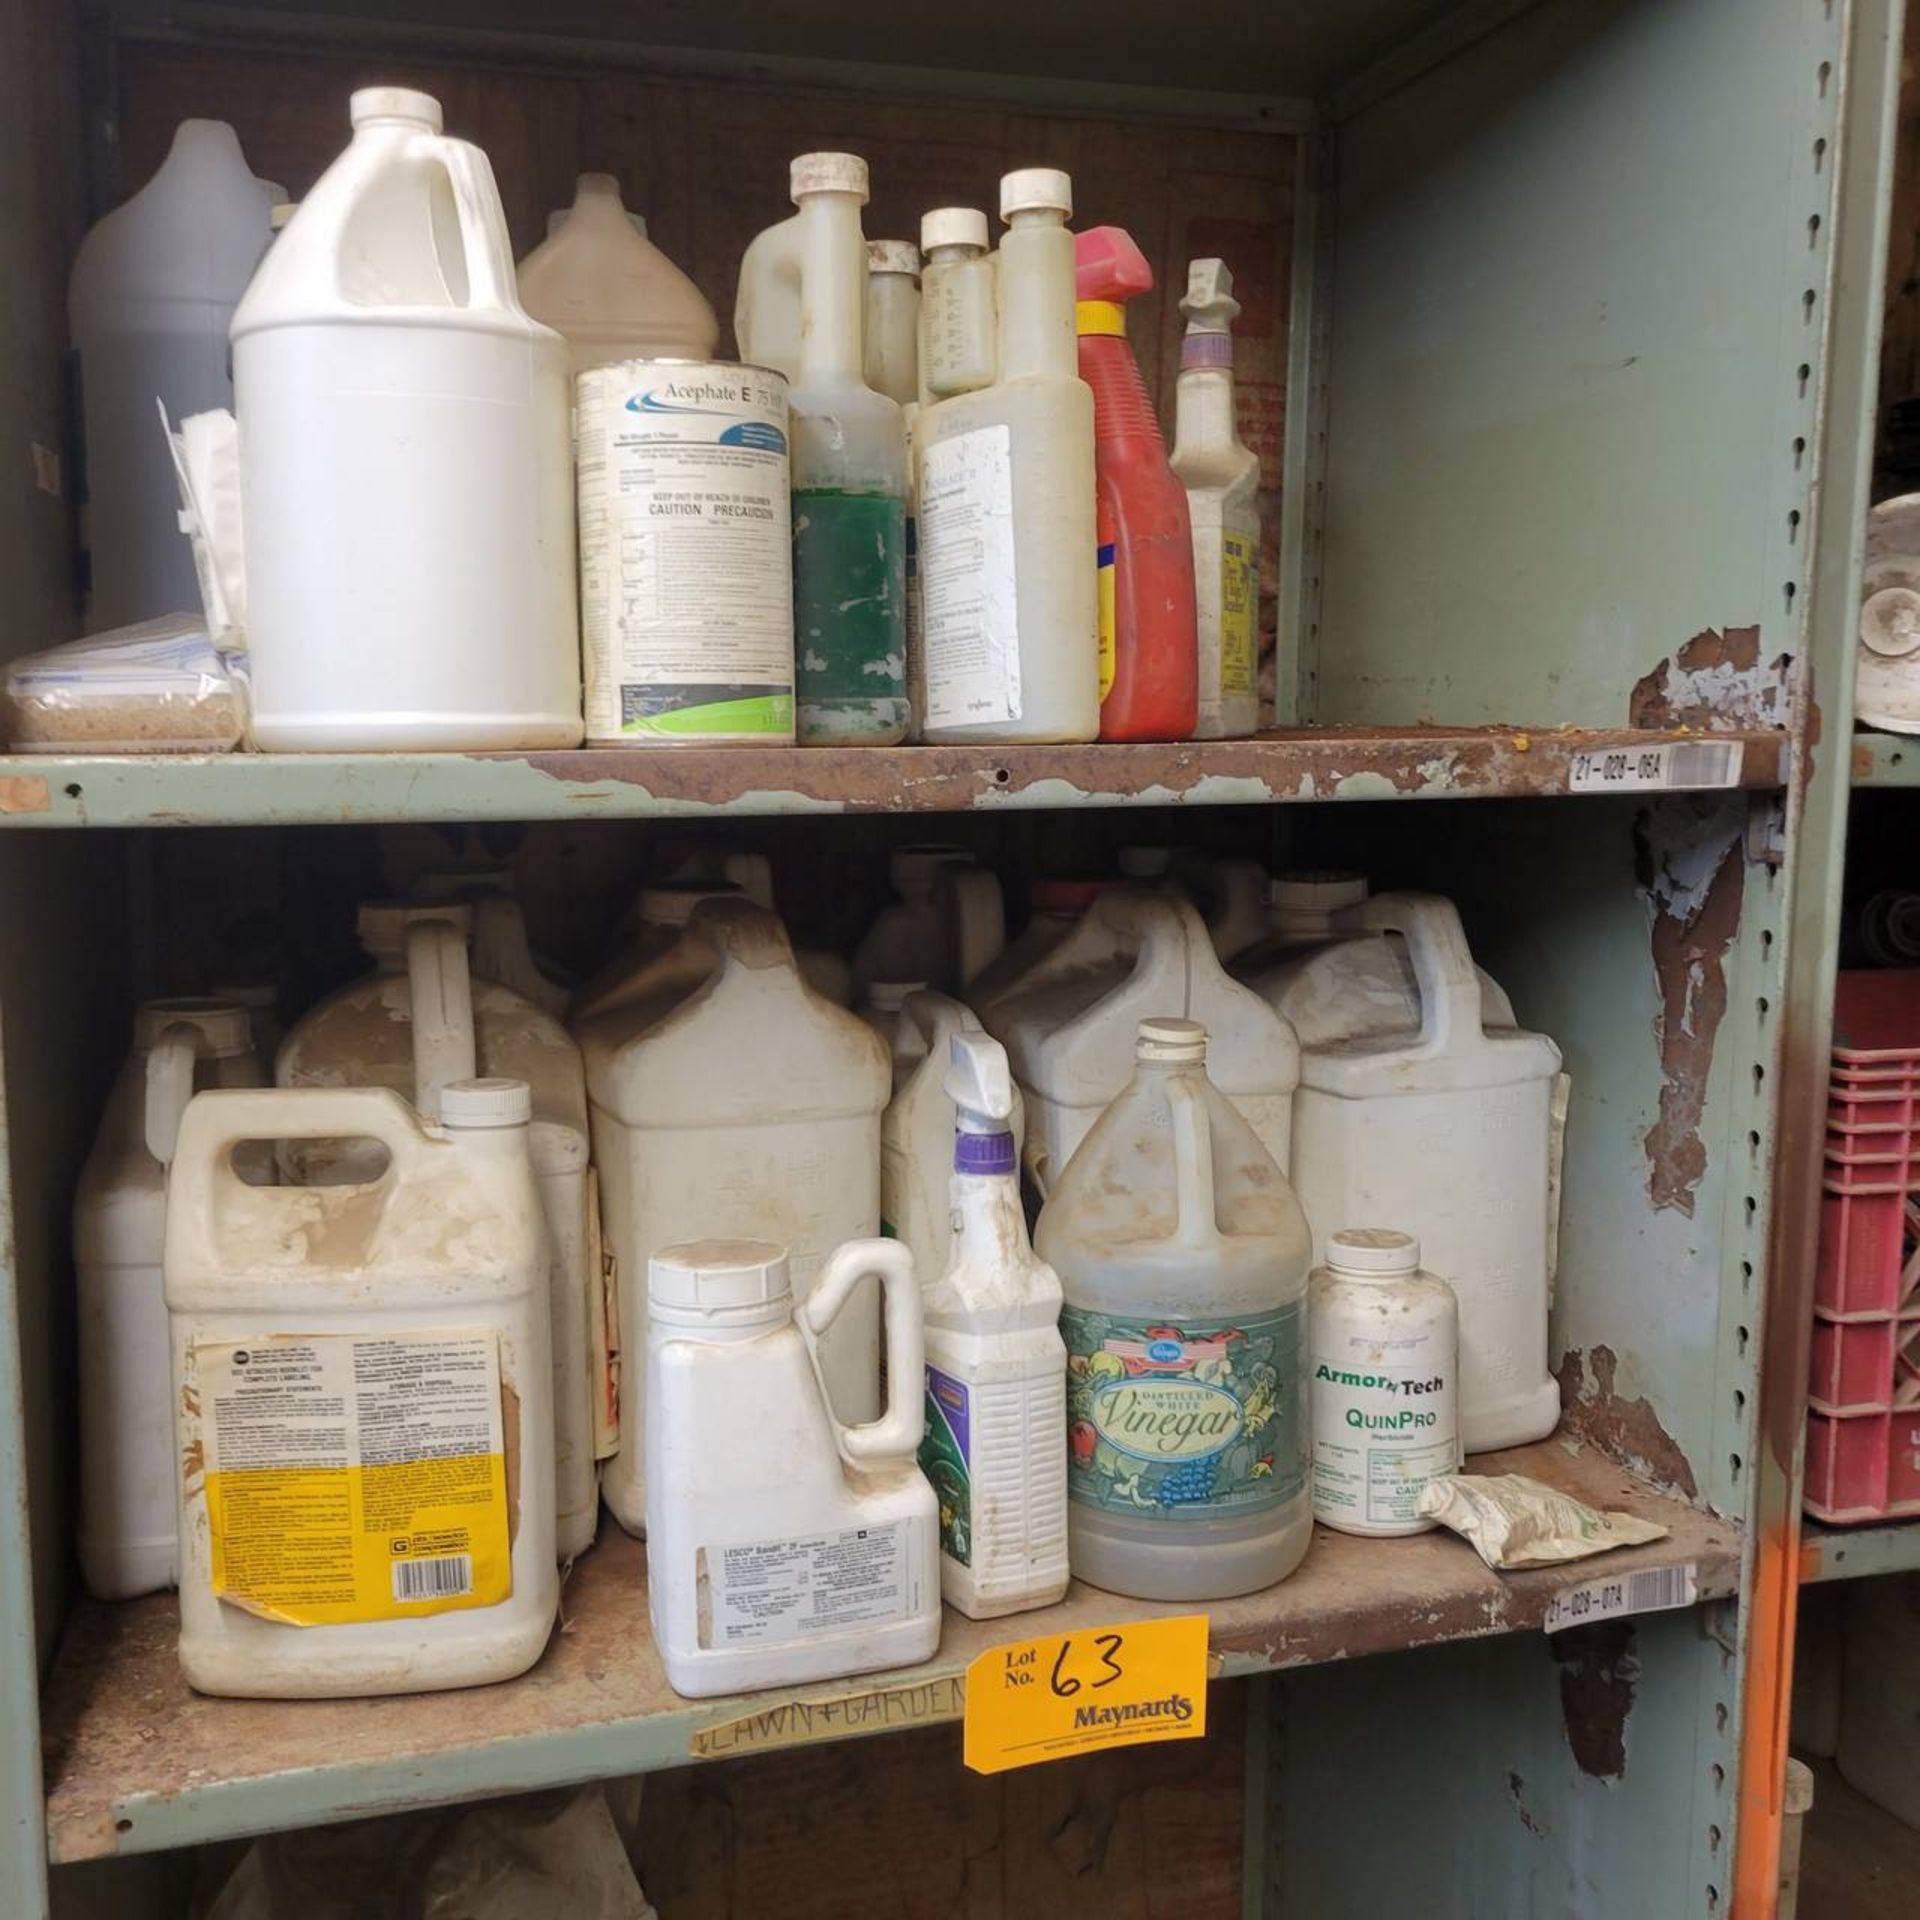 Lot of cleaners, paints, stains and fertilizers